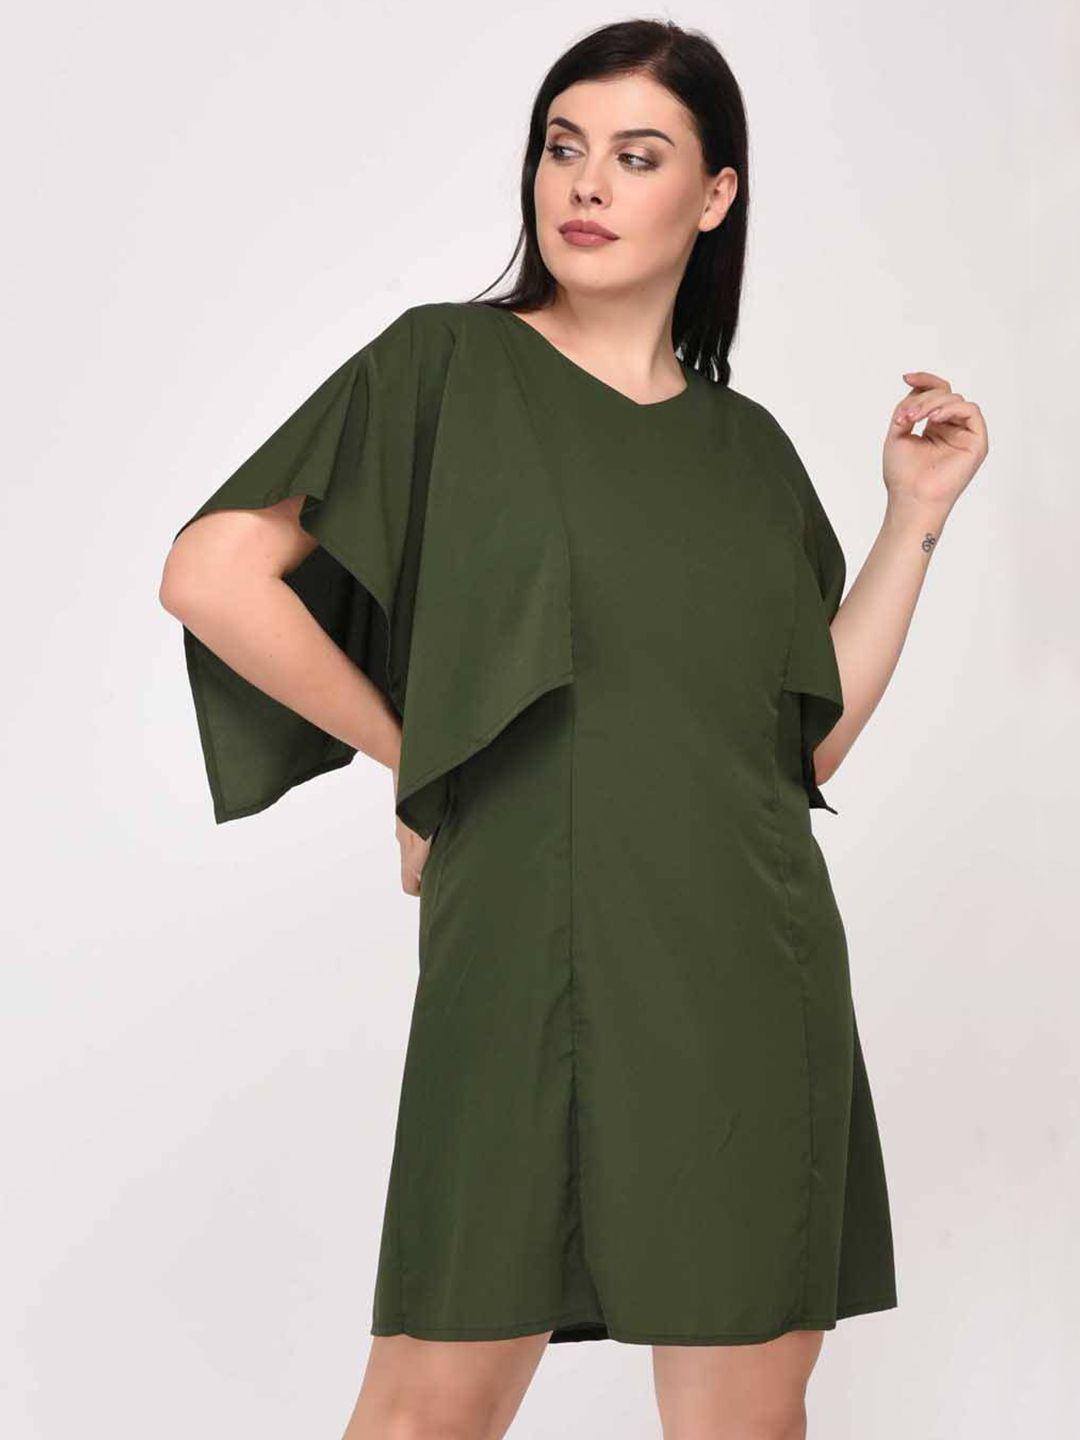 lastinch olive green solid a-line dress